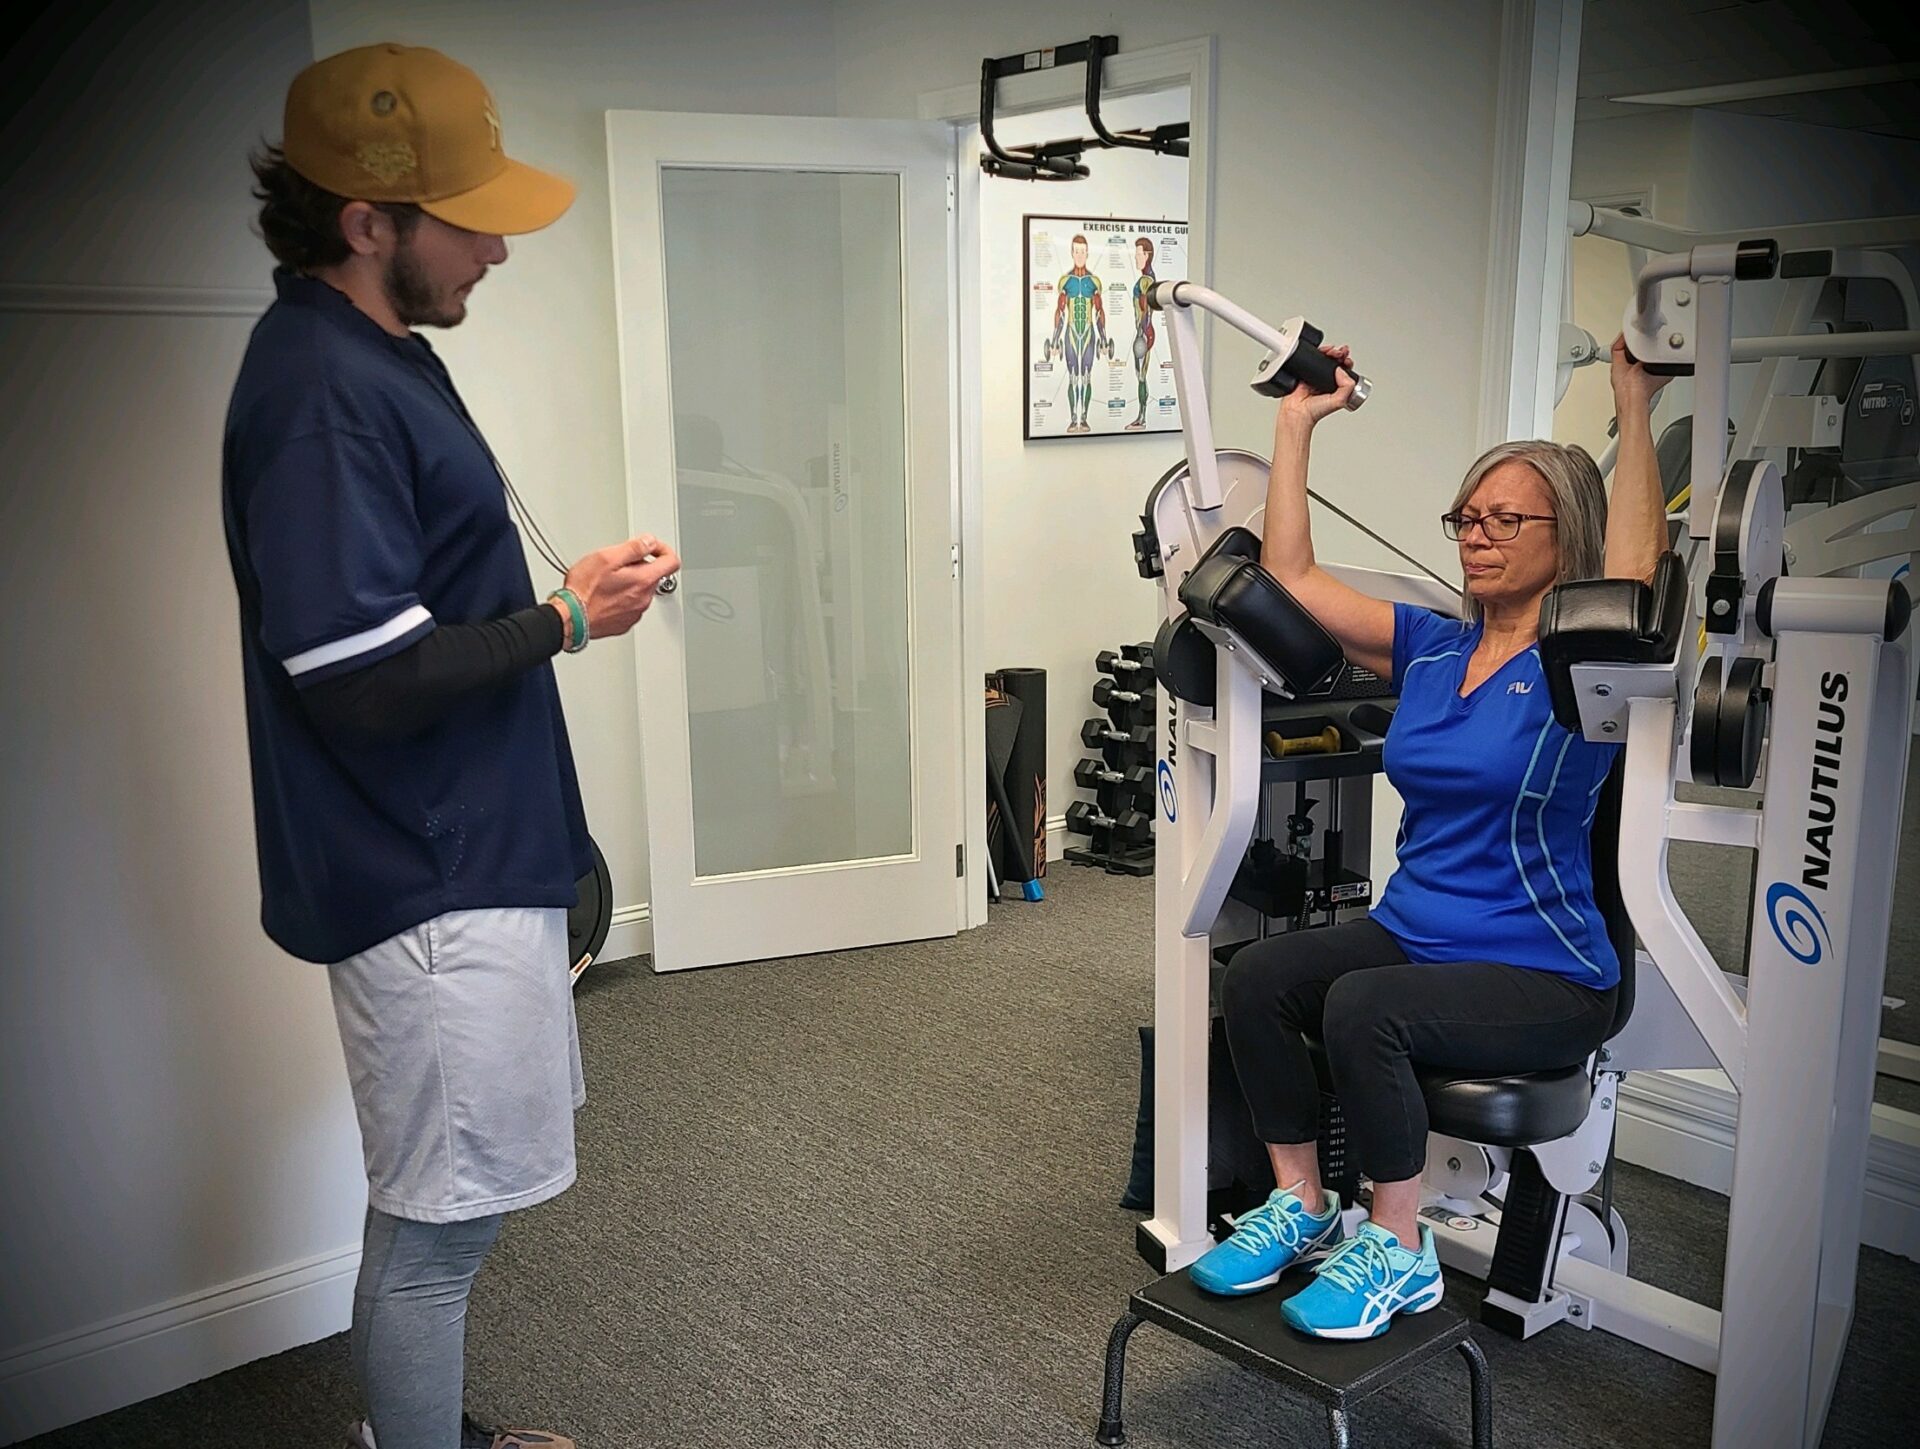 certified personal trainer observes woman using strength training machine